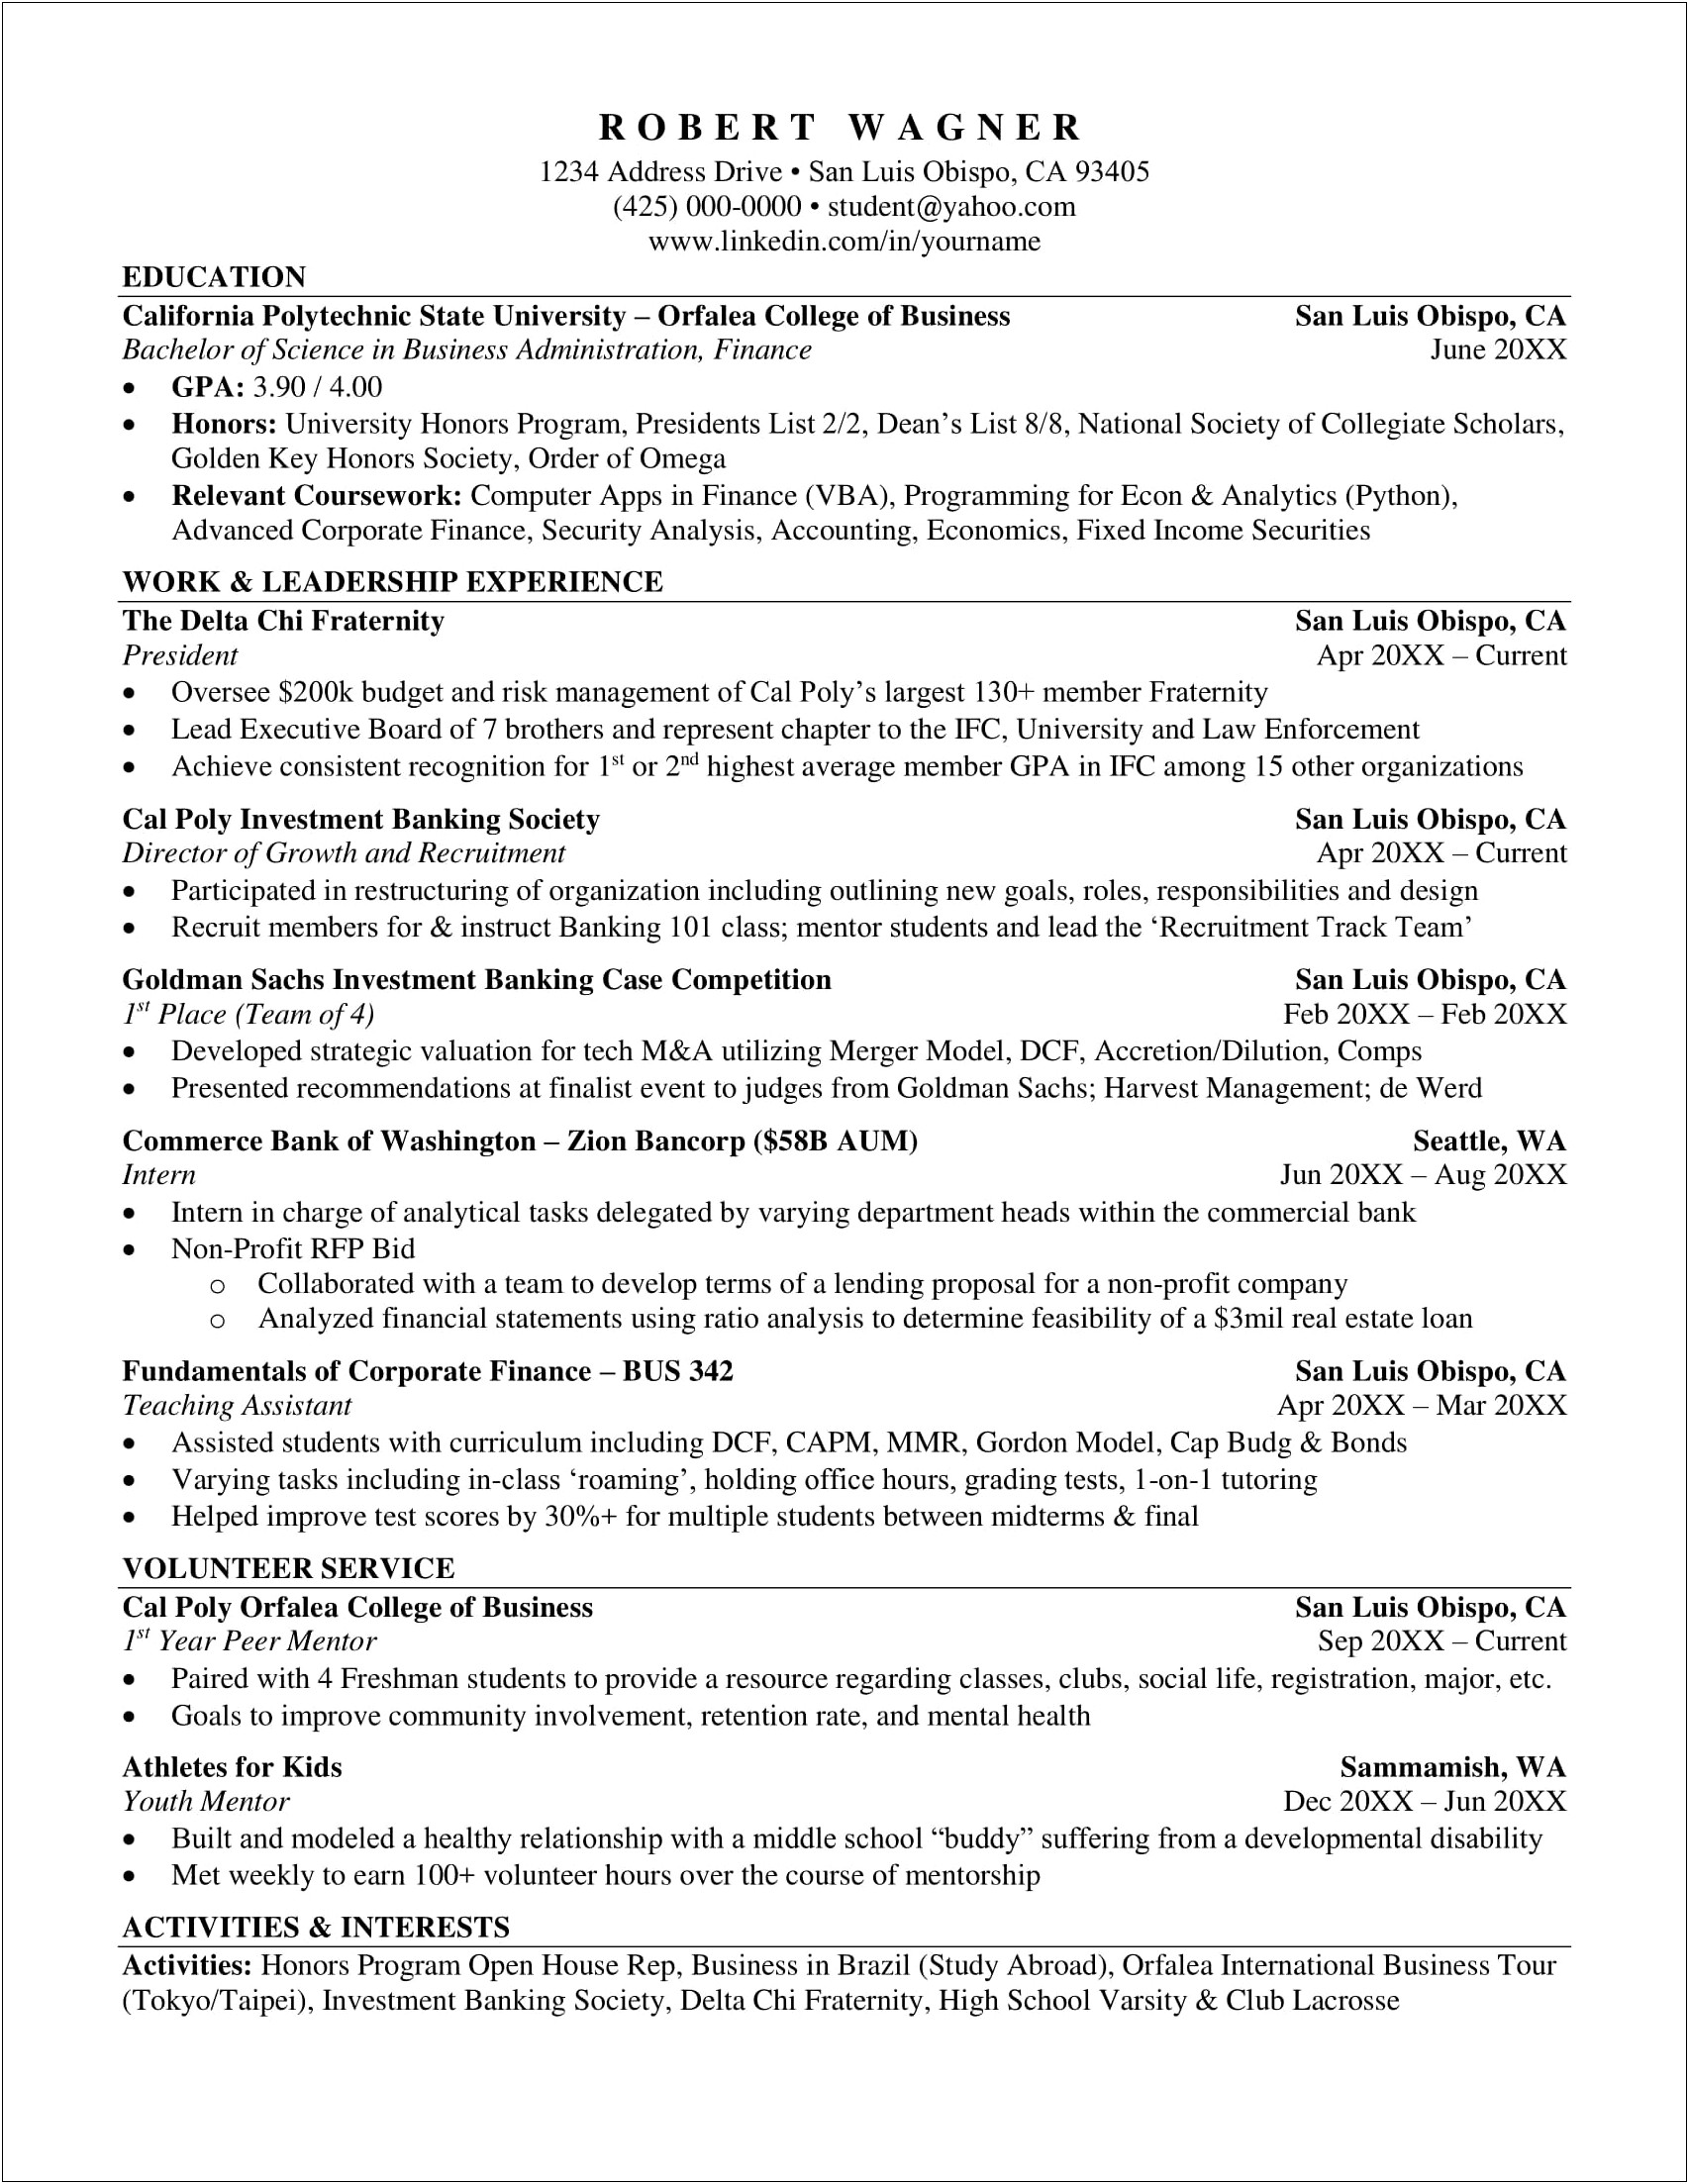 Career Management Resume Services Oroville